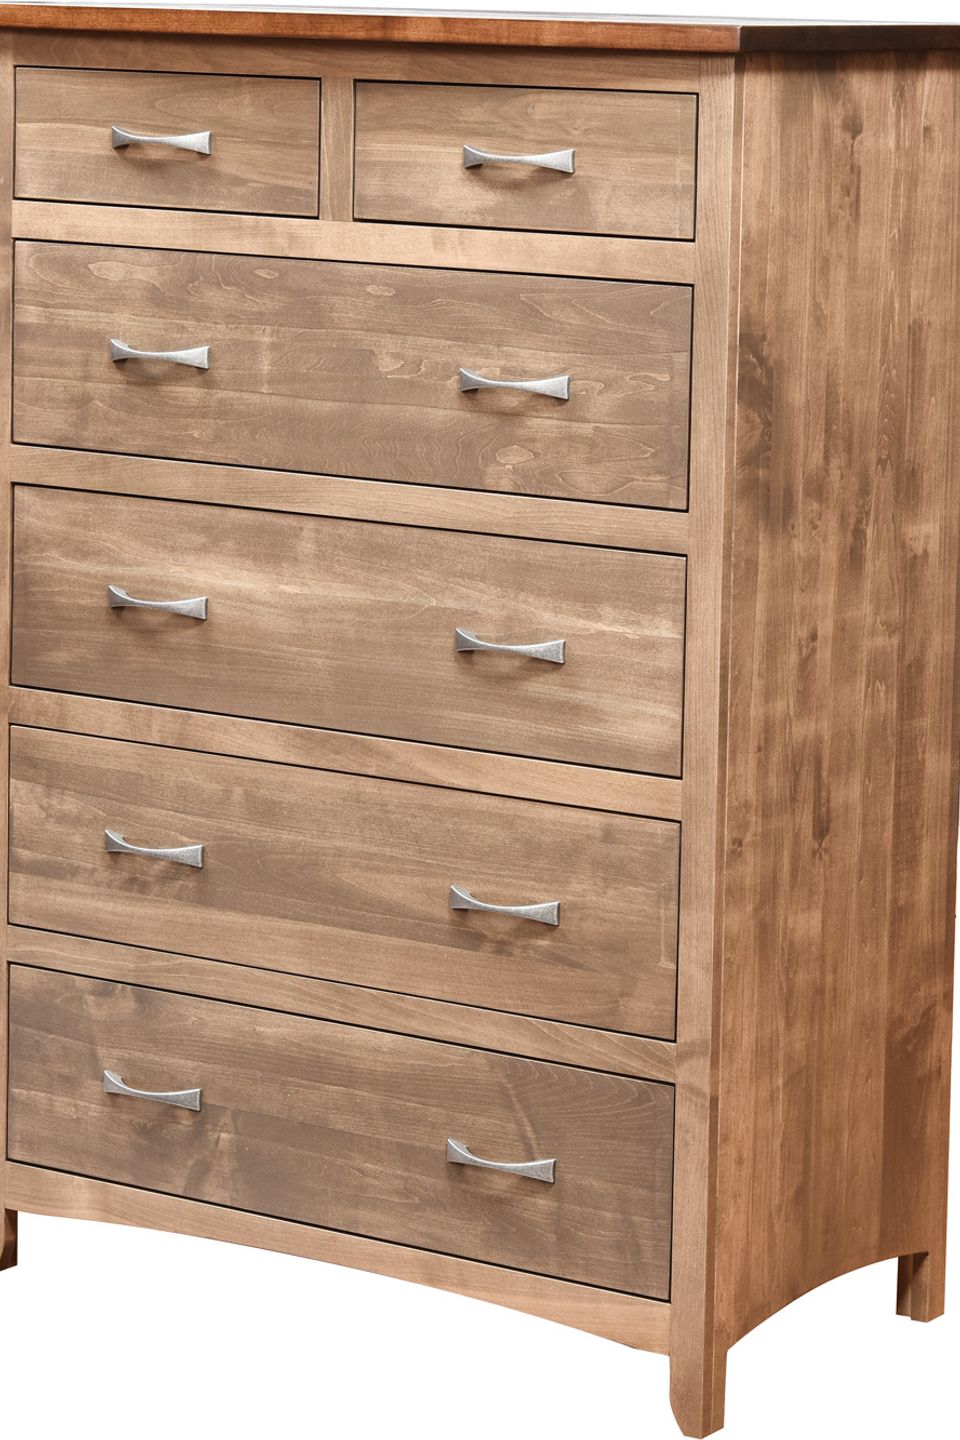 Mbed roxbury chest of drawers